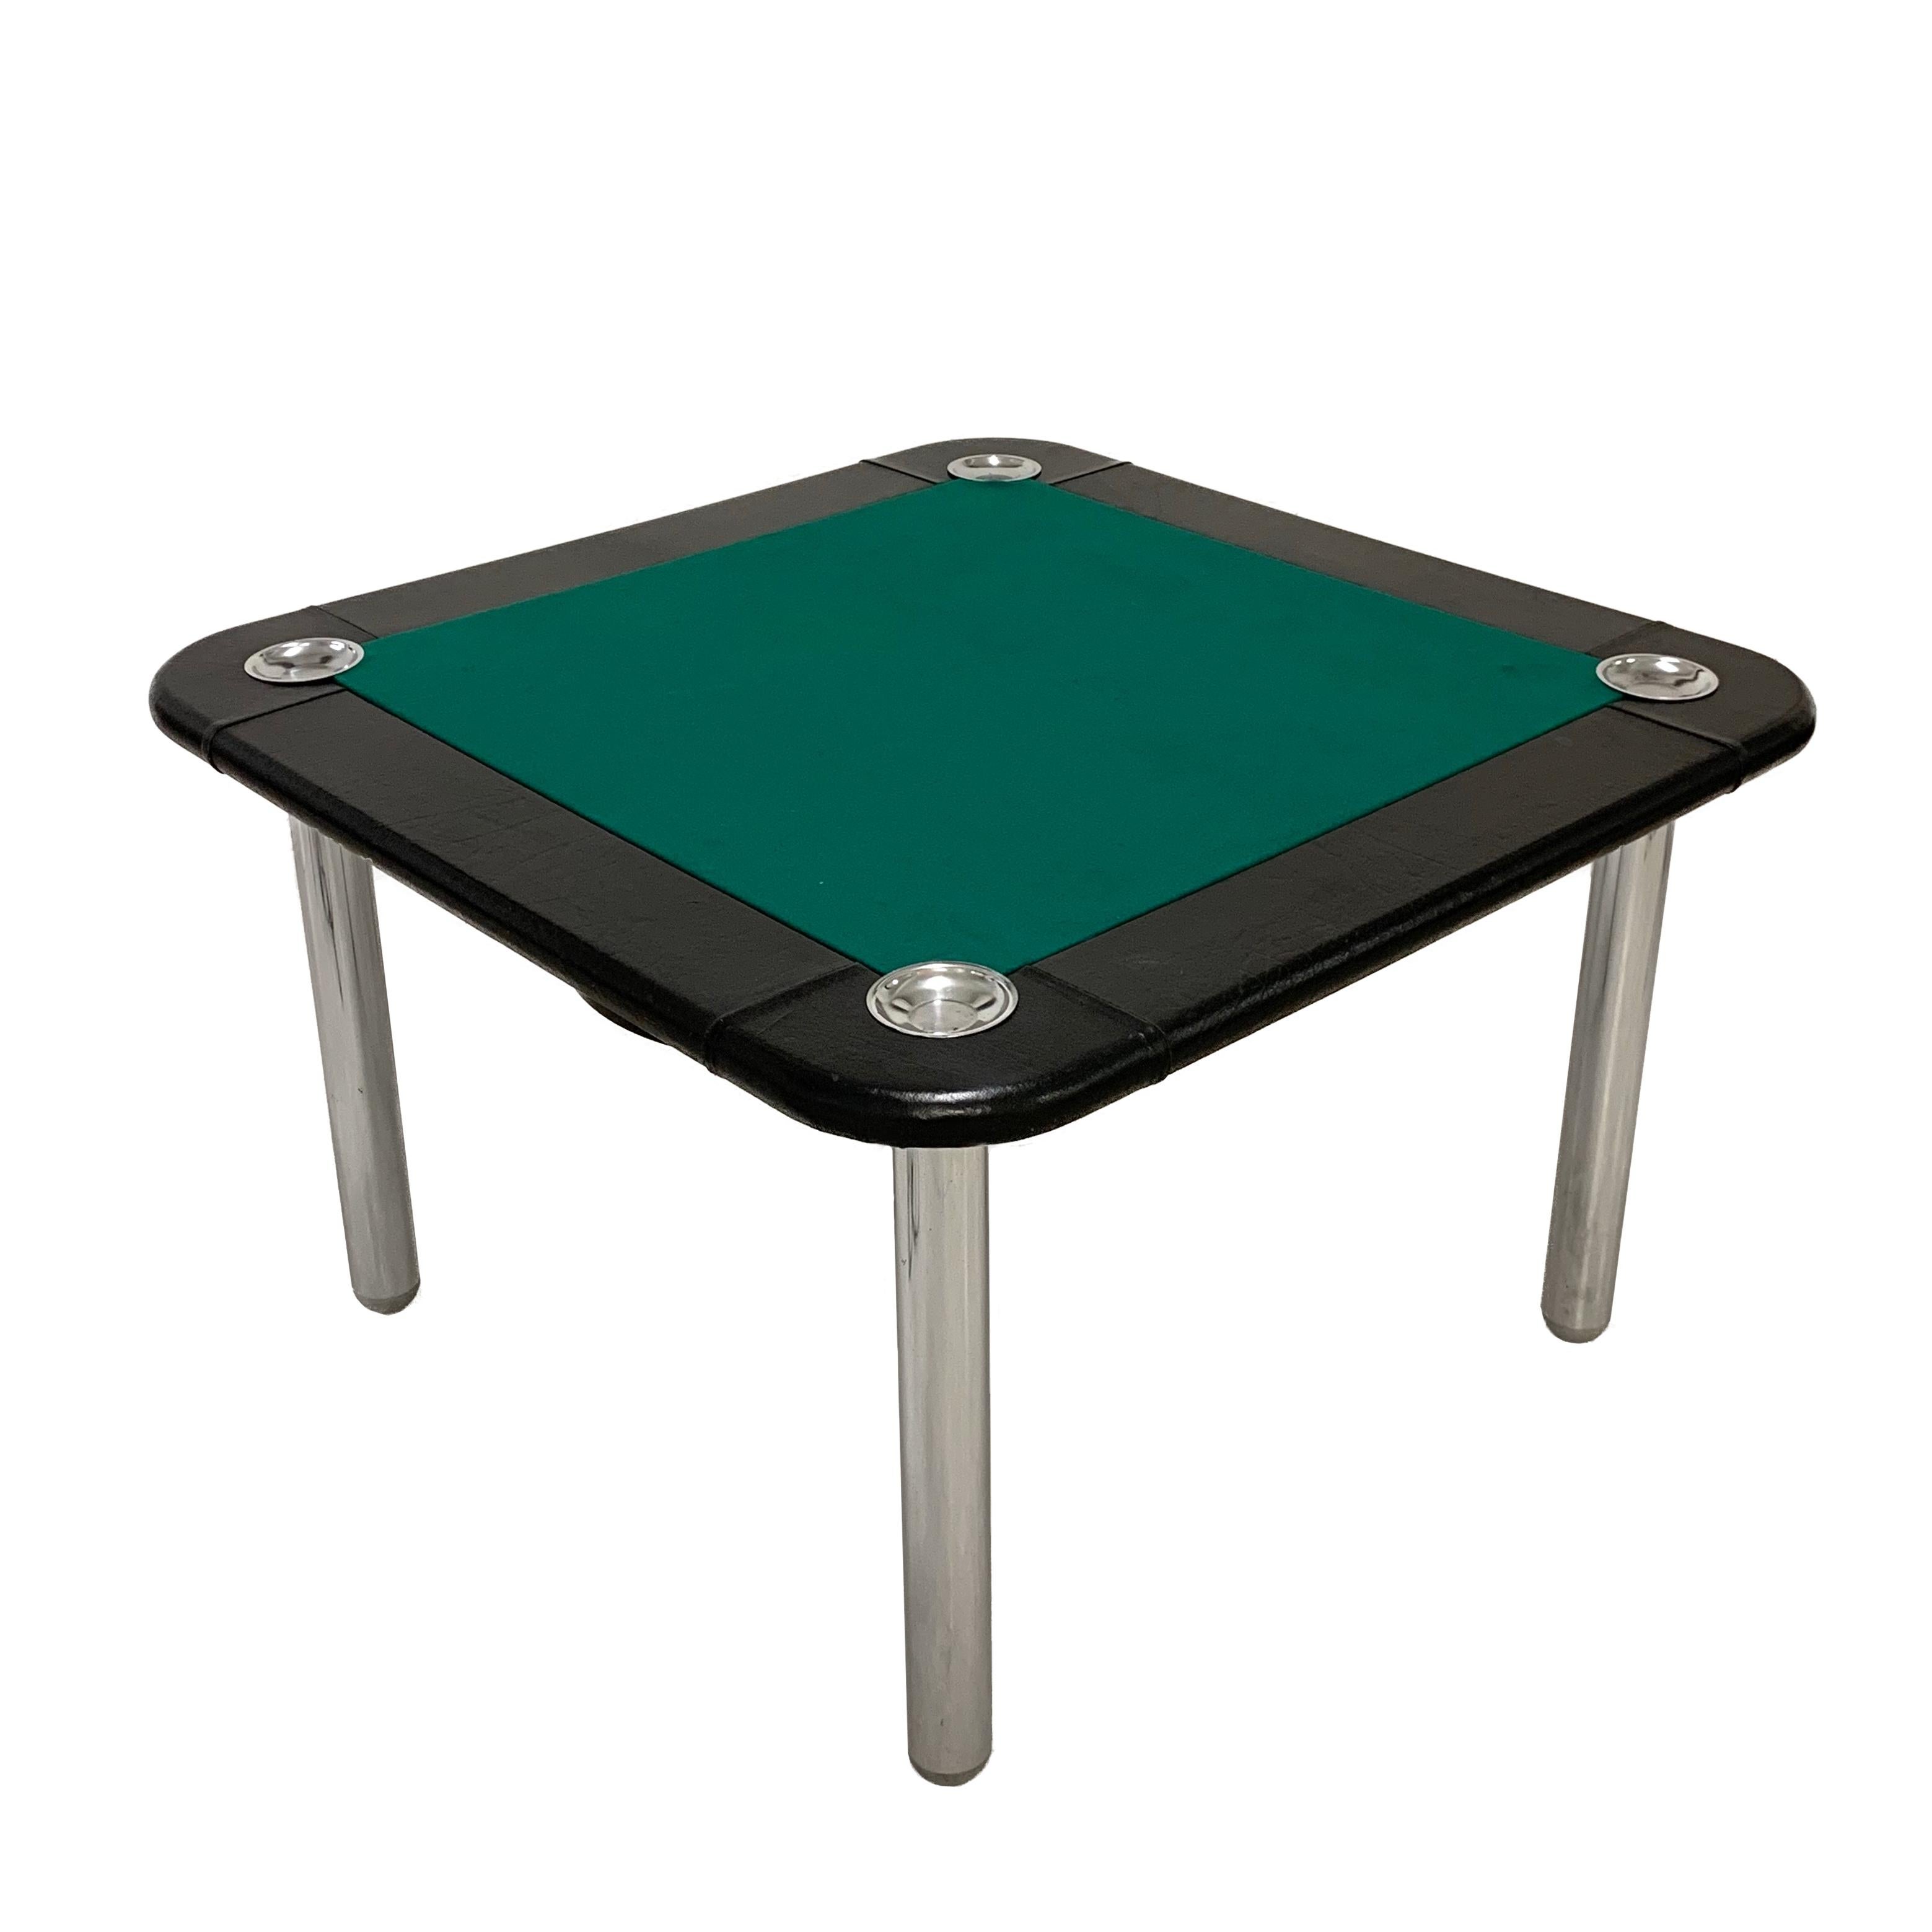 This large gaming table attributable to Zanotta S.p.A., Italy. The top is in new green fabric, black leather edges and four ashtrays. The tubular legs are made of stainless steel with black plastic tops. The table is complete with swivel ashtrays